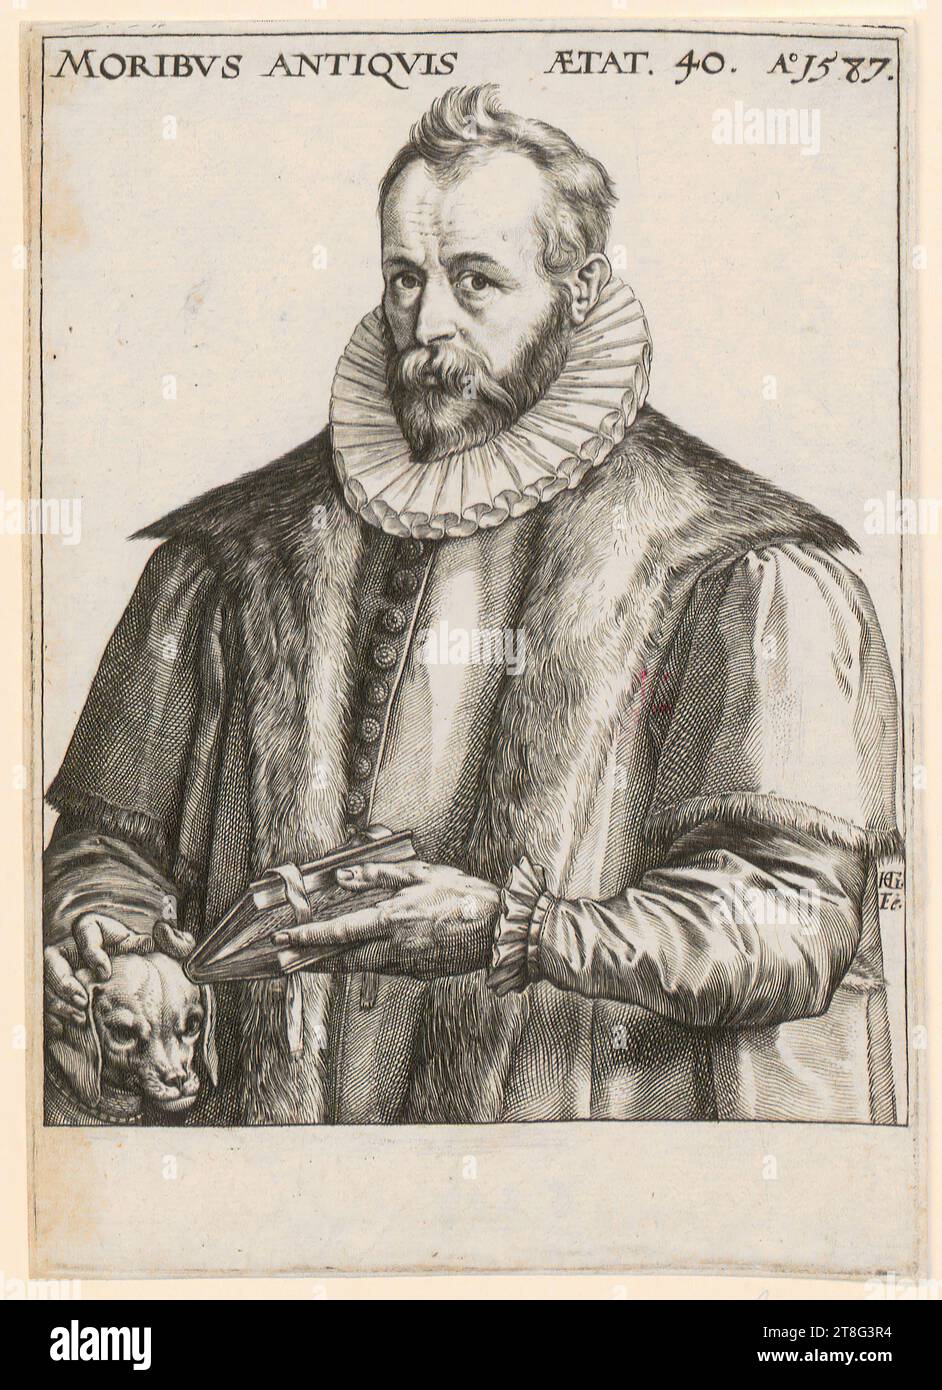 Hendrick Goltzius (1558 - 1617), artist, portrait of Justus Lipsius, print date: 1587, copperplate engraving, sheet size: 14.3 x 10.2 cm, inscribed and dated at top 'MORIBVS ANTQVIS ÆTAT. 40. A° 1587.' and monogrammed lower right 'HG Stock Photo